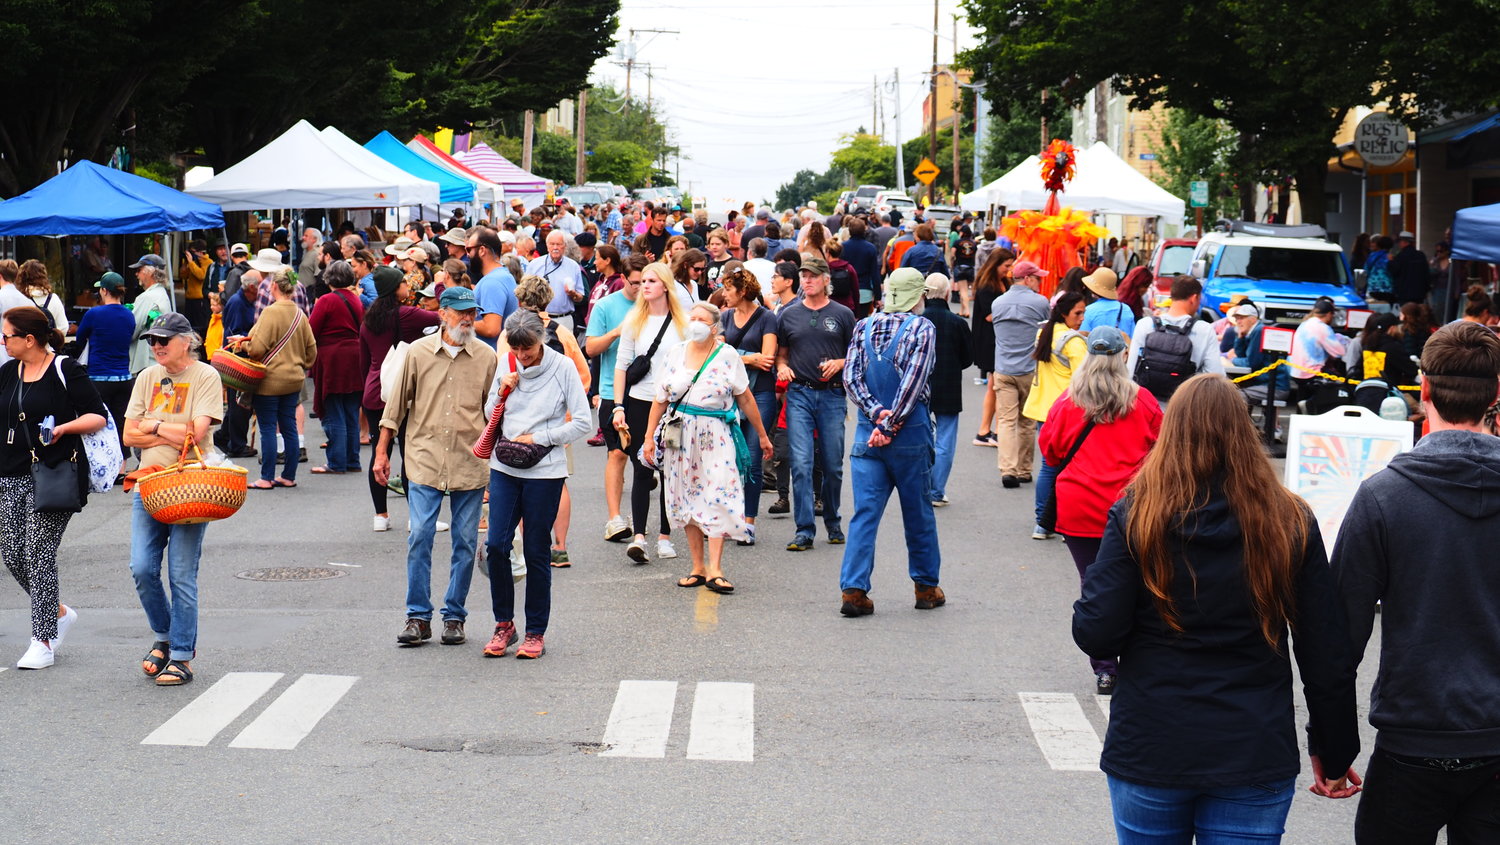 The streets were full of people wandering between the craft fair, farmers market, beer garden, and art activities for all ages.